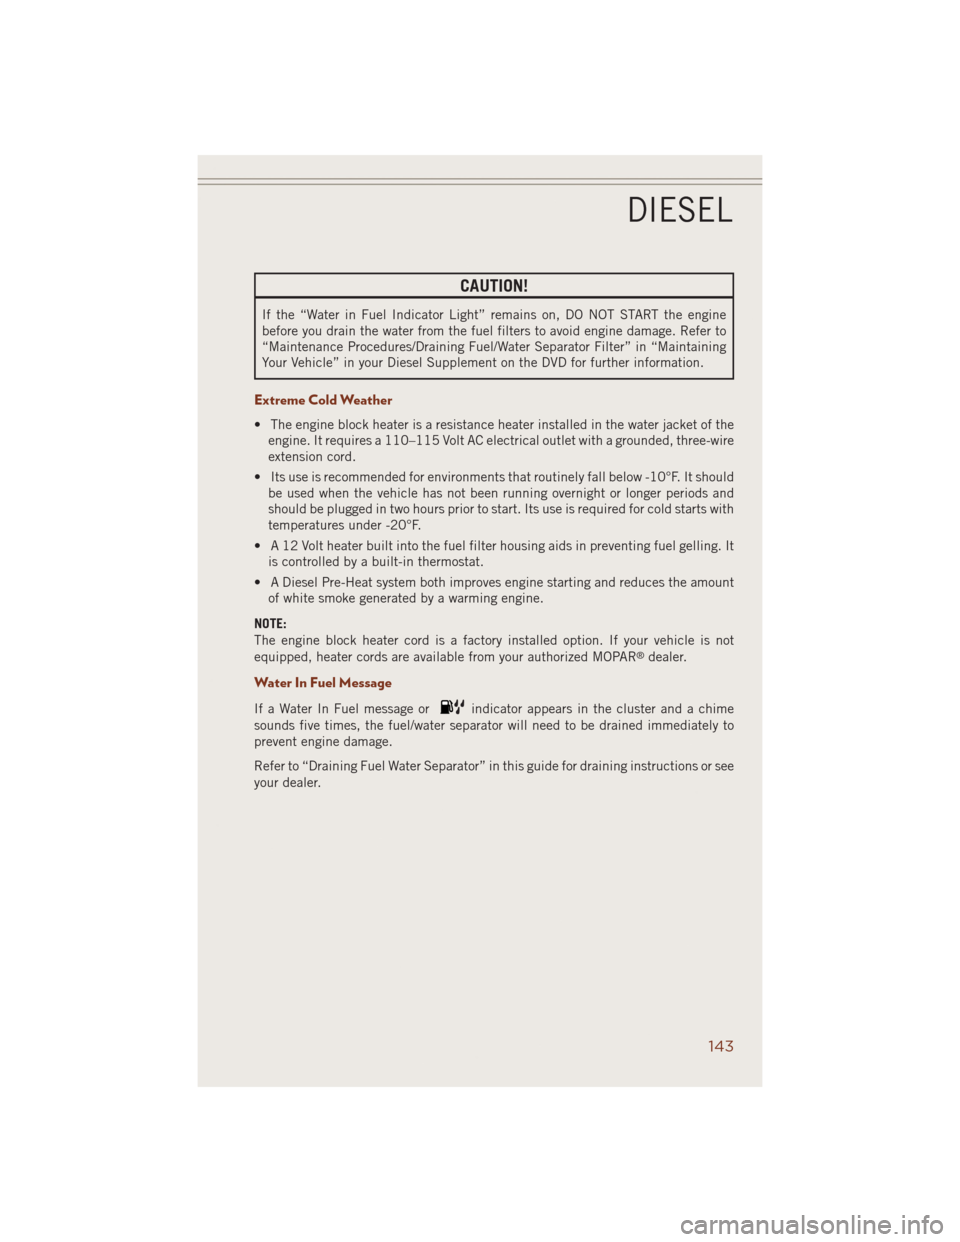 JEEP GRAND CHEROKEE 2014 WK2 / 4.G User Guide CAUTION!
If the “Water in Fuel Indicator Light” remains on, DO NOT START the engine
before you drain the water from the fuel filters to avoid engine damage. Refer to
“Maintenance Procedures/Drai